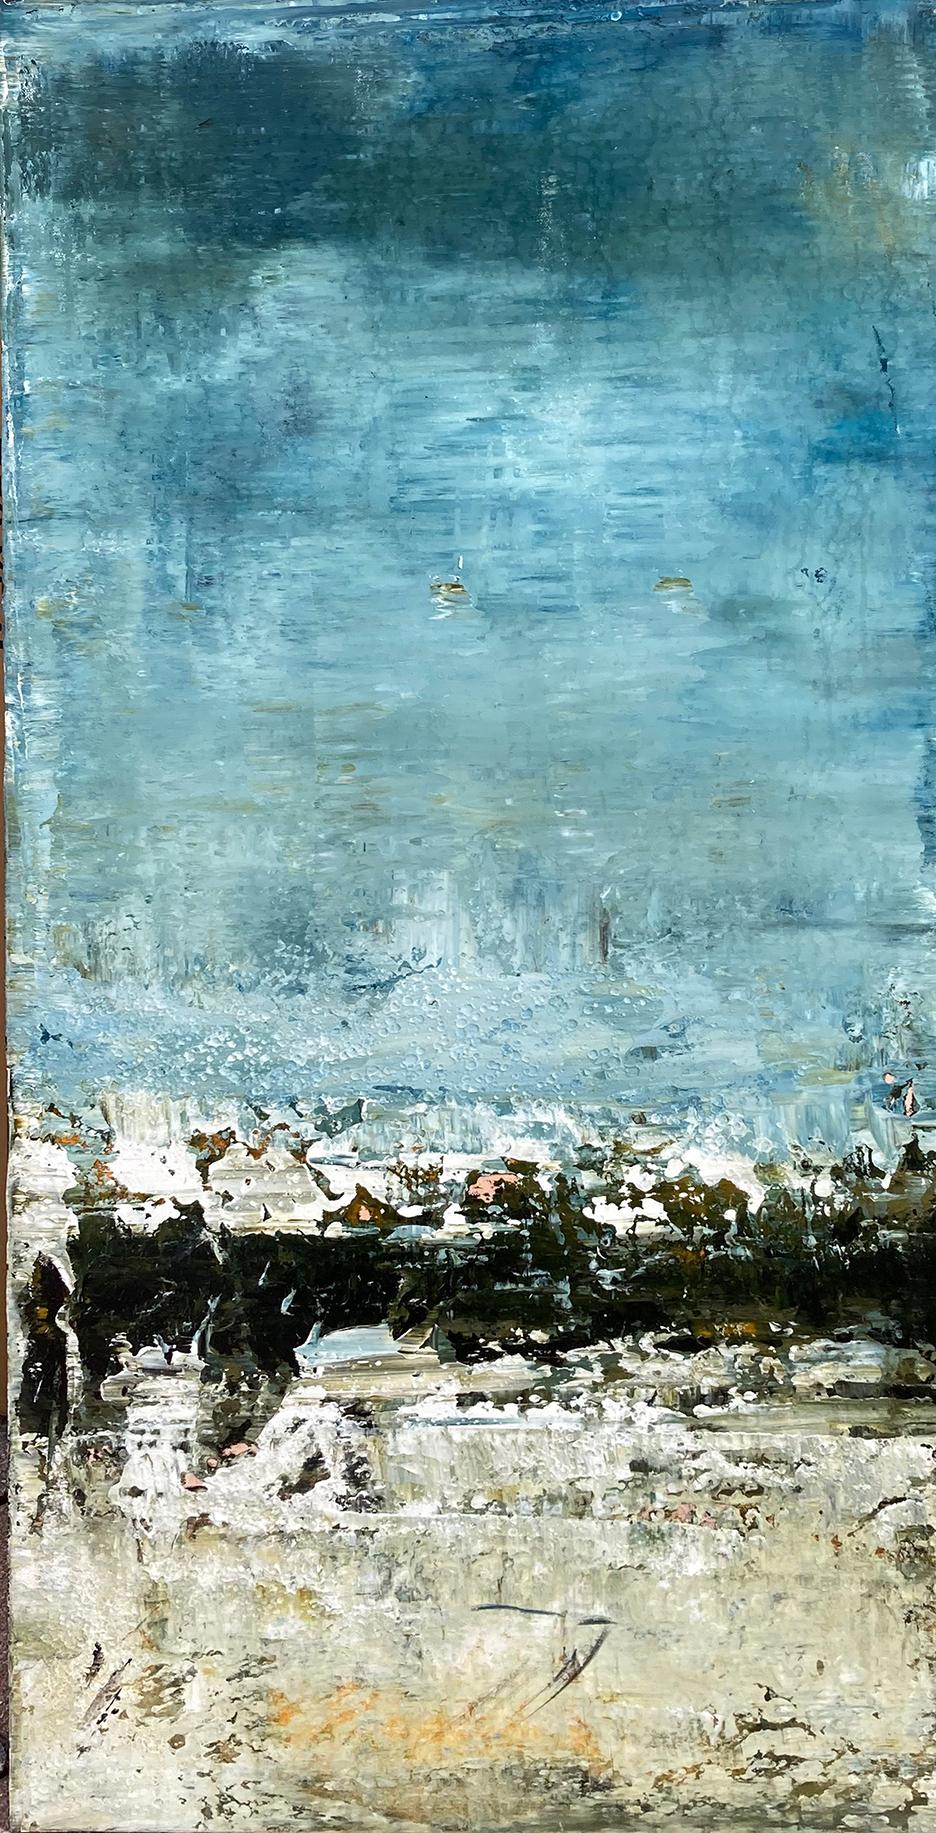 Untitled, no 10 - Textured Abstract Landscape Painting - Mixed Media Art by Brad Robertson